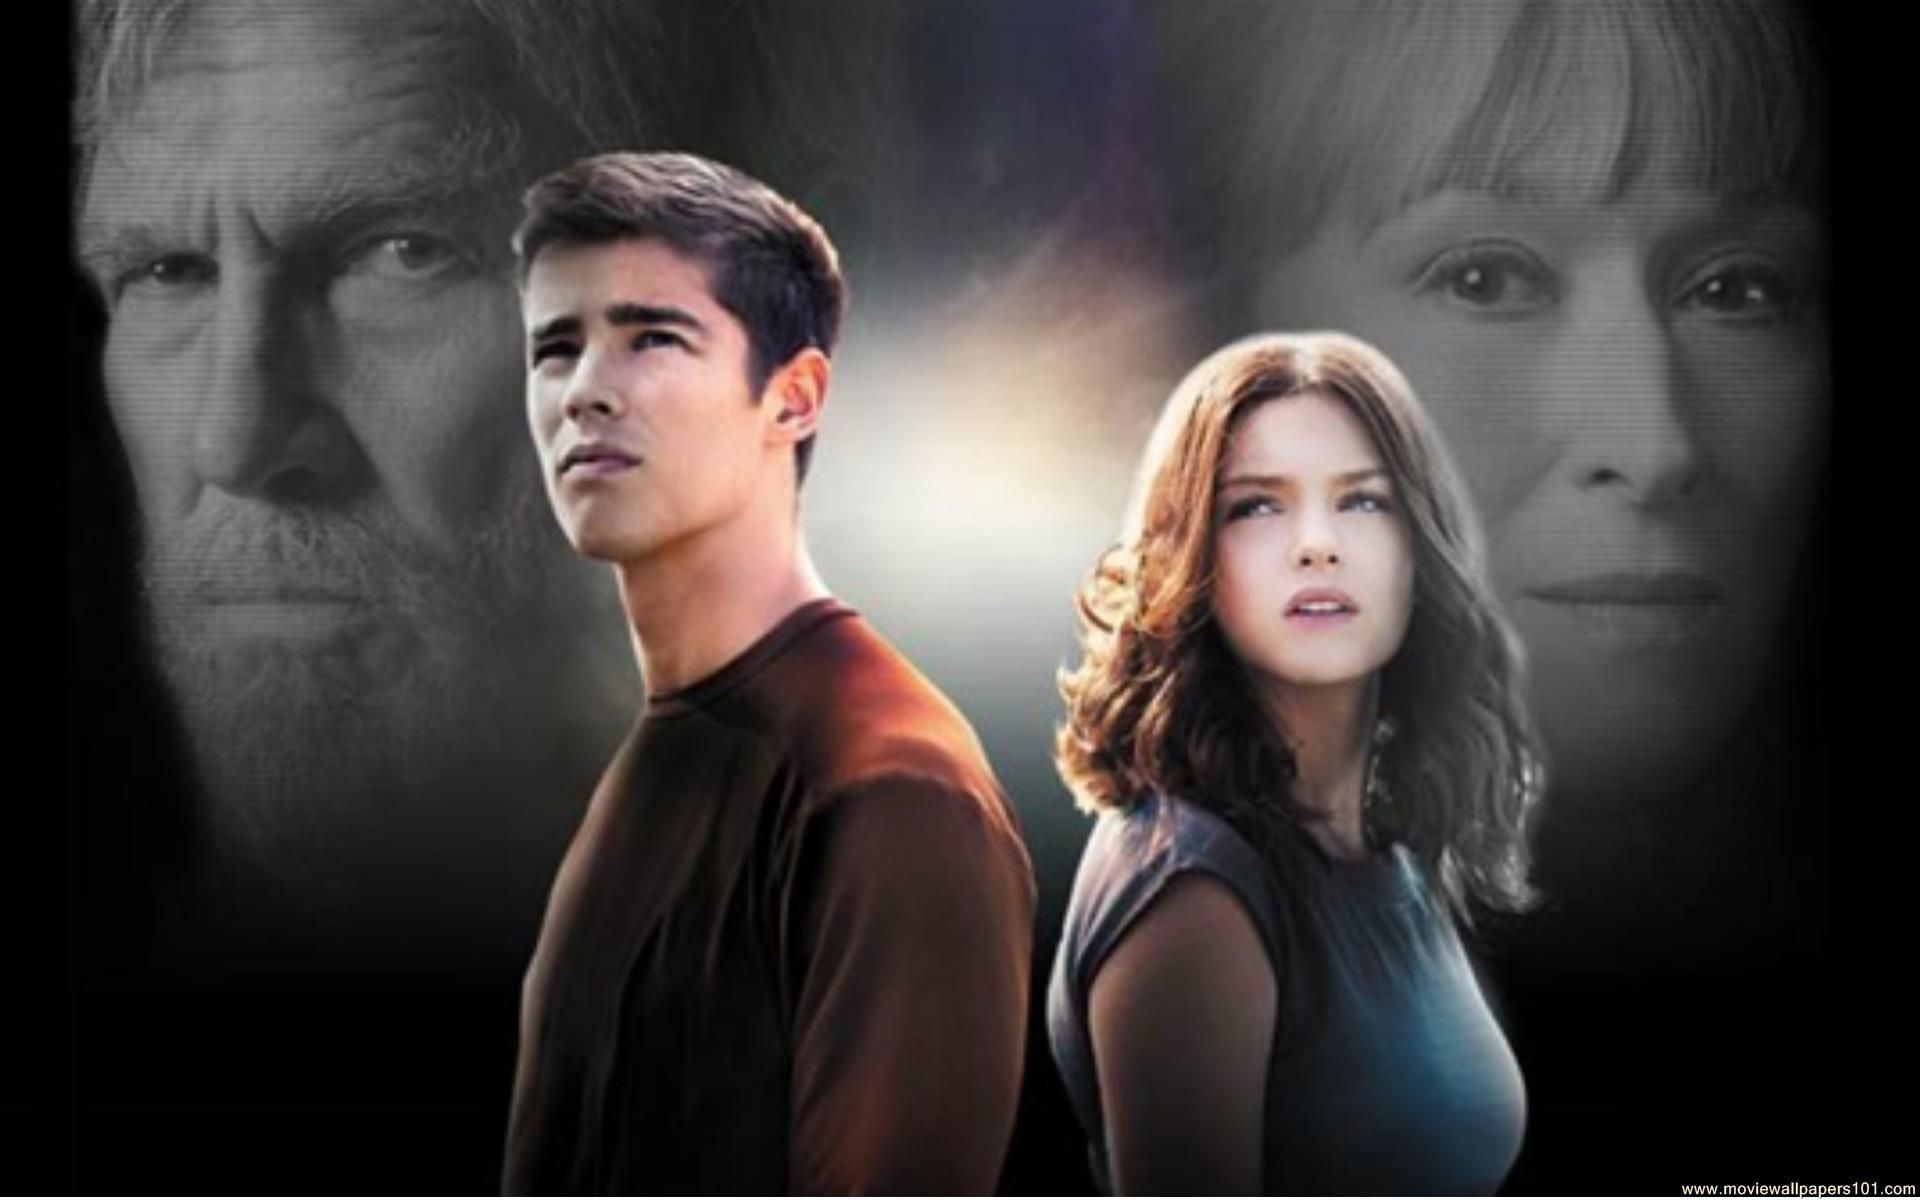 The Giver Wallpaper Pack 49: The Giver Wallpaper, 45 The Giver